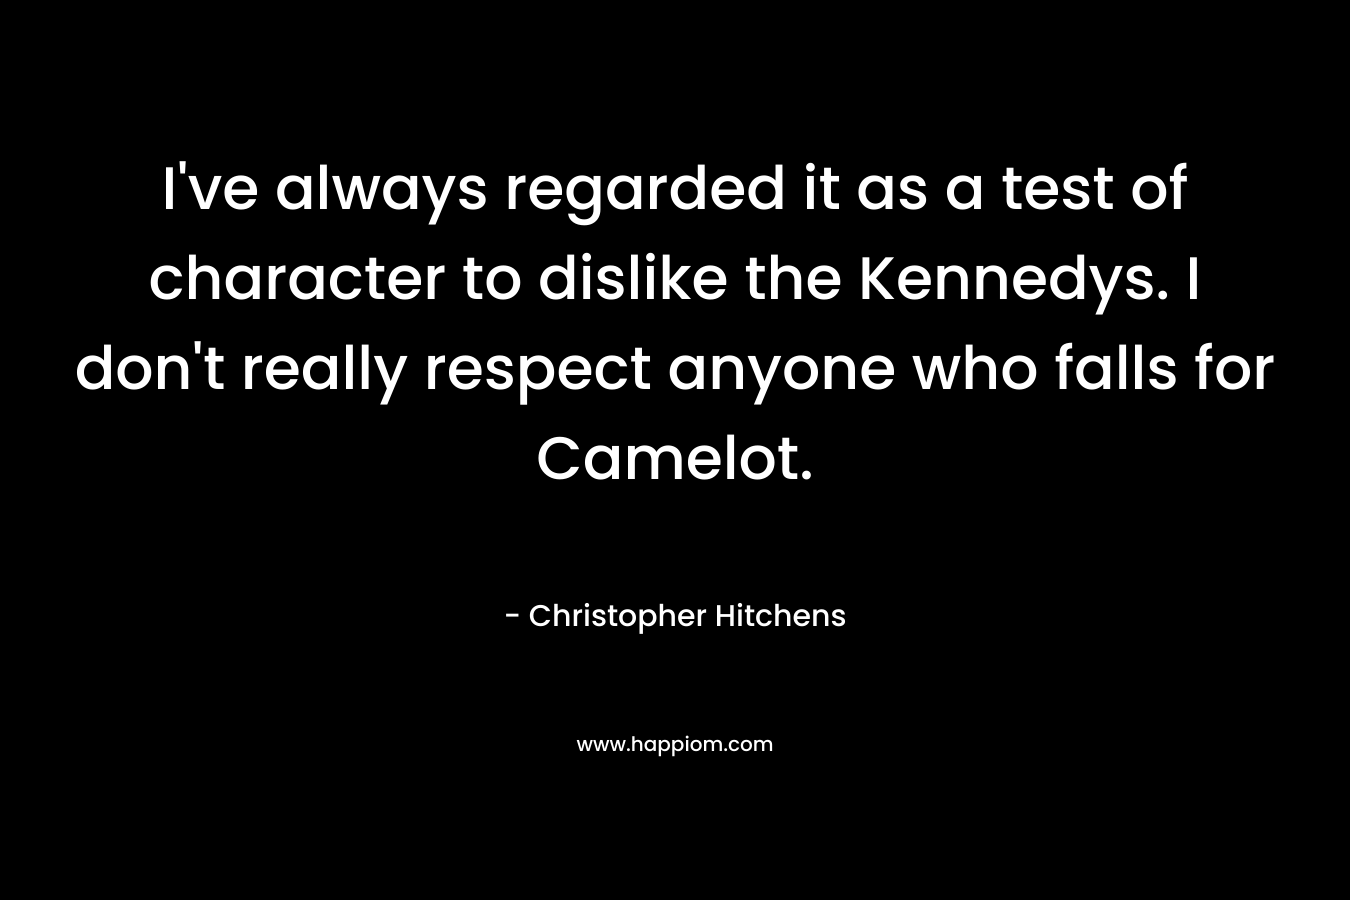 I’ve always regarded it as a test of character to dislike the Kennedys. I don’t really respect anyone who falls for Camelot. – Christopher Hitchens